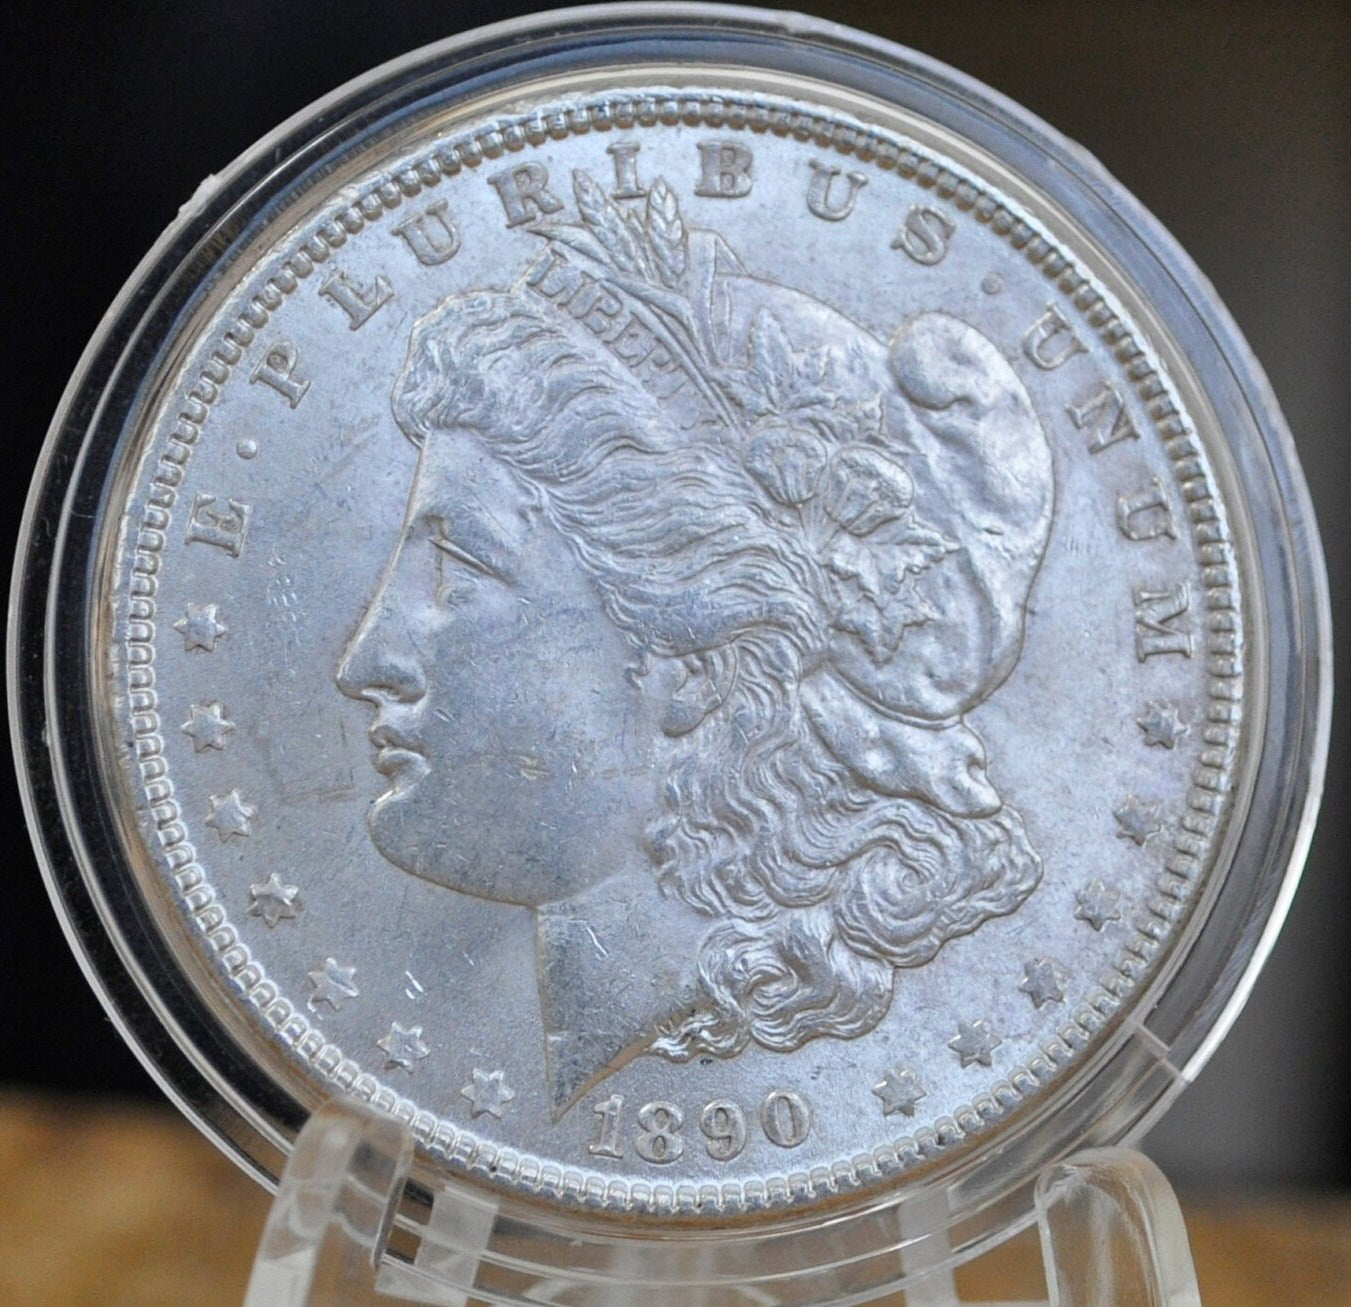 1890 Morgan Silver Dollar - AU (About Uncirculated) Condition - Philadelphia Mint - 1890 P Morgan Silver Dollar 1890 - Beautiful Coin